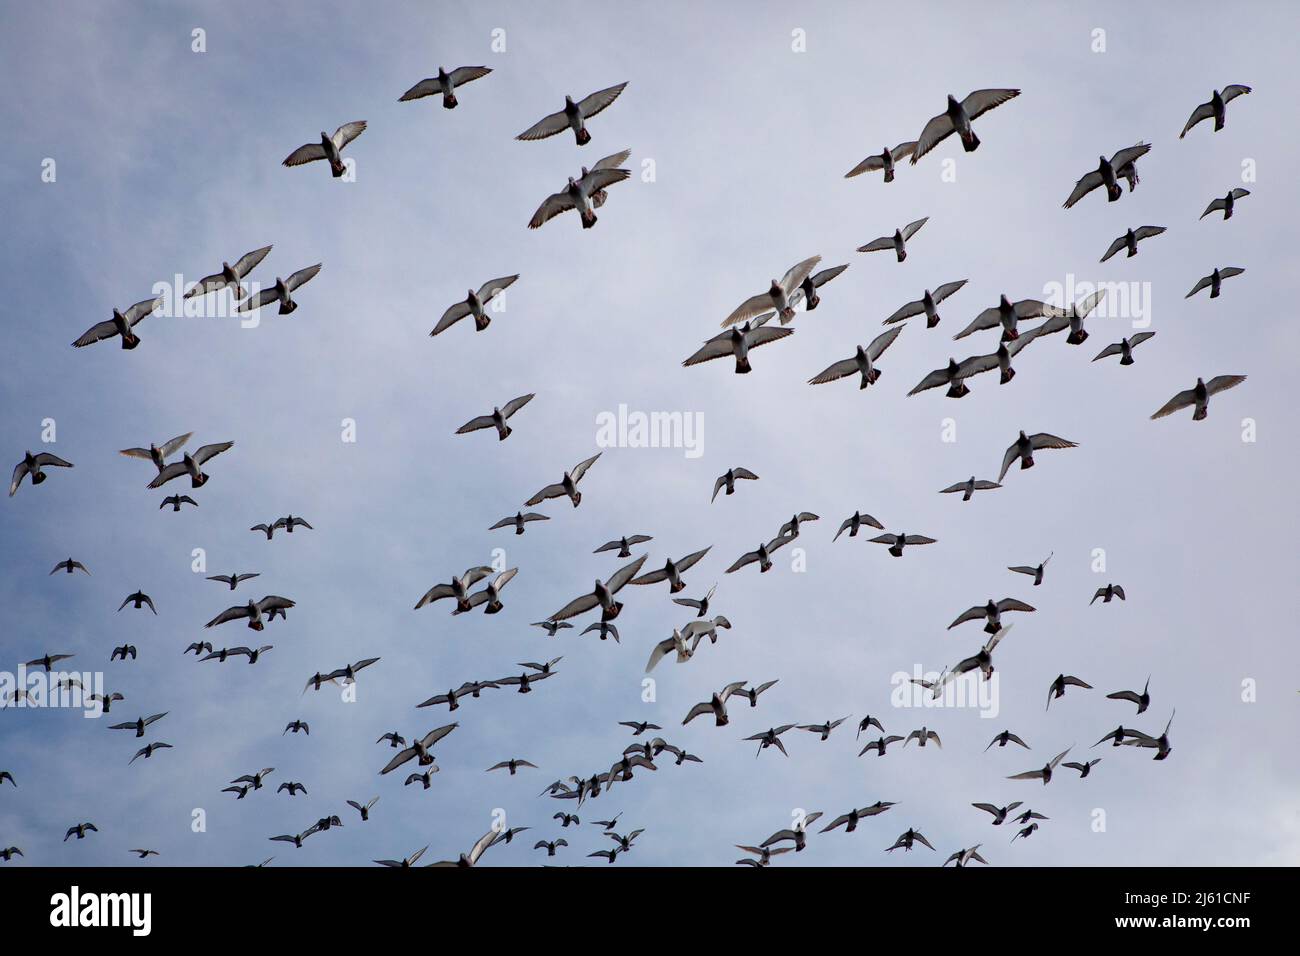 flock of speed racing pigeon flying against blue cloudy sky Stock Photo